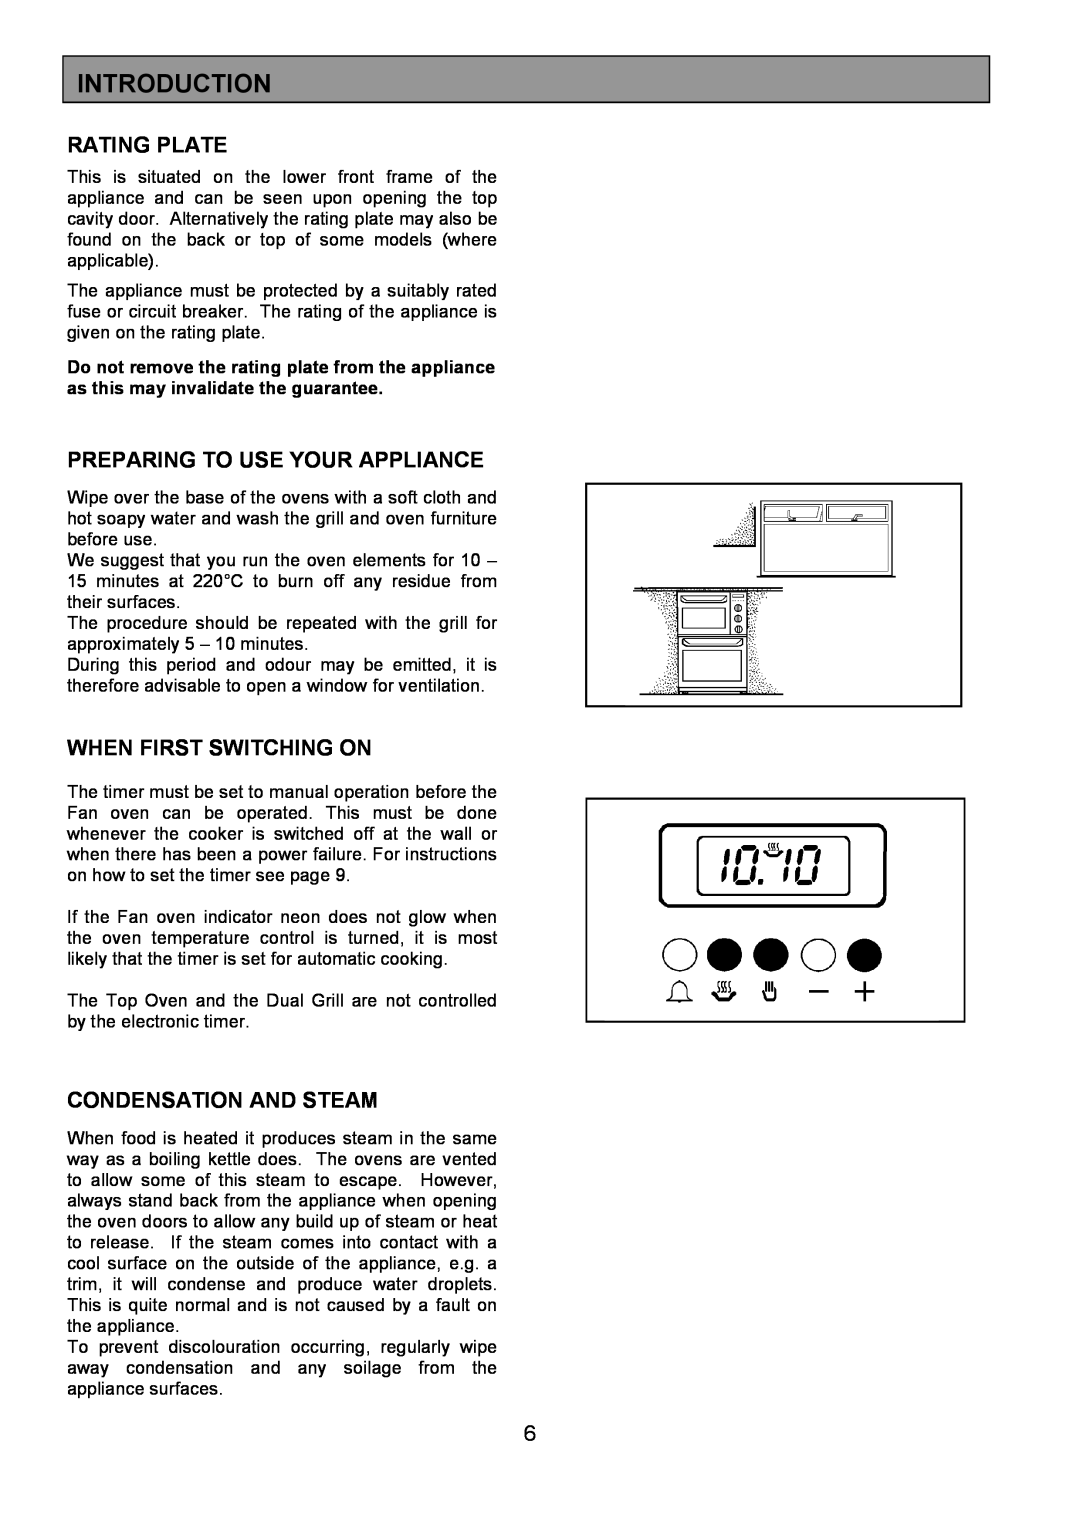 Zanussi ZHF865 manual Introduction, Rating Plate, Preparing To Use Your Appliance, When First Switching On 